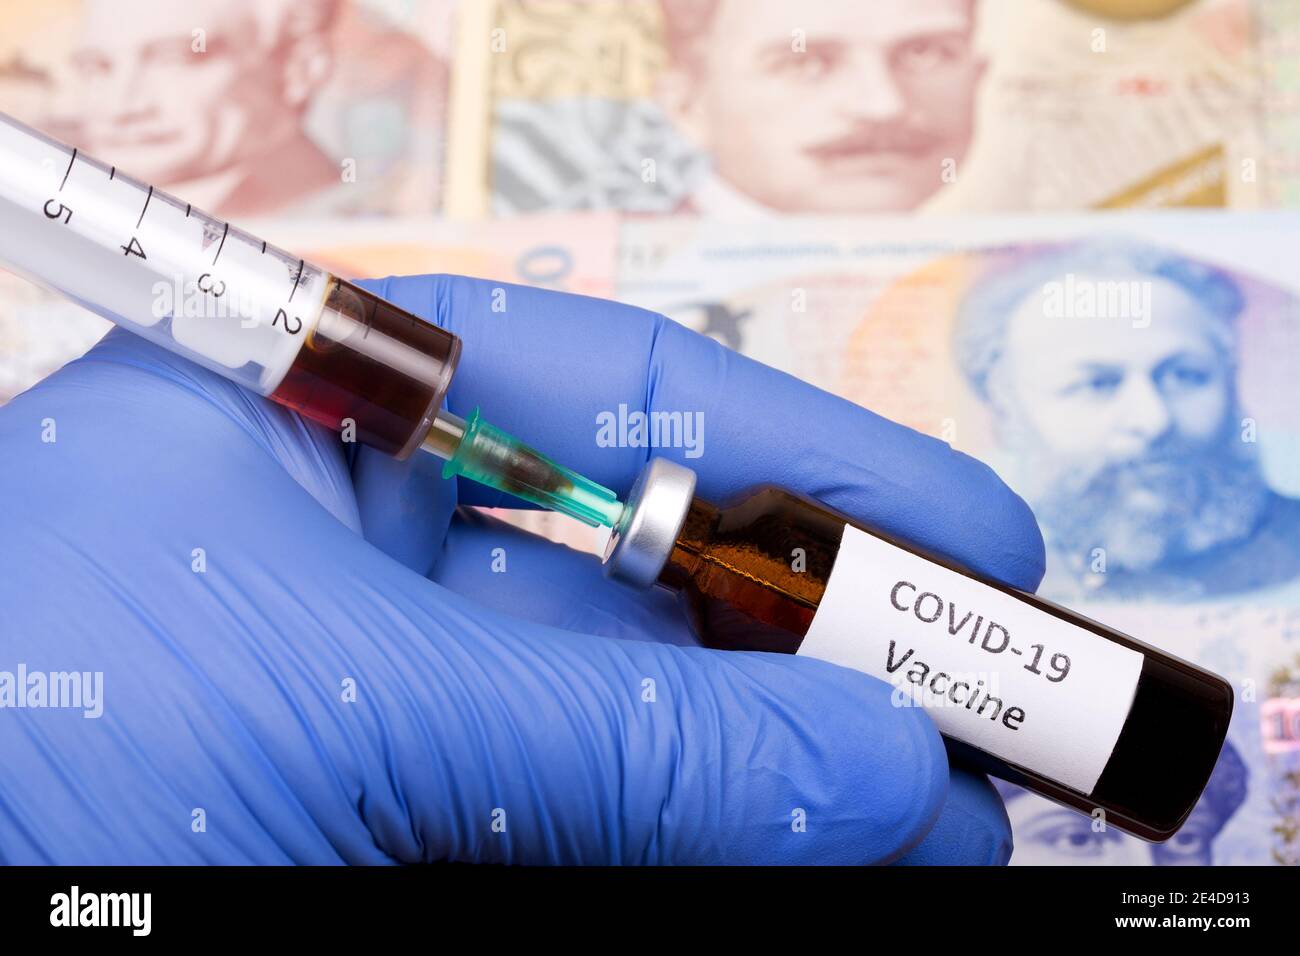 Vaccine against Covid-19 on the background of Georgian money Stock Photo